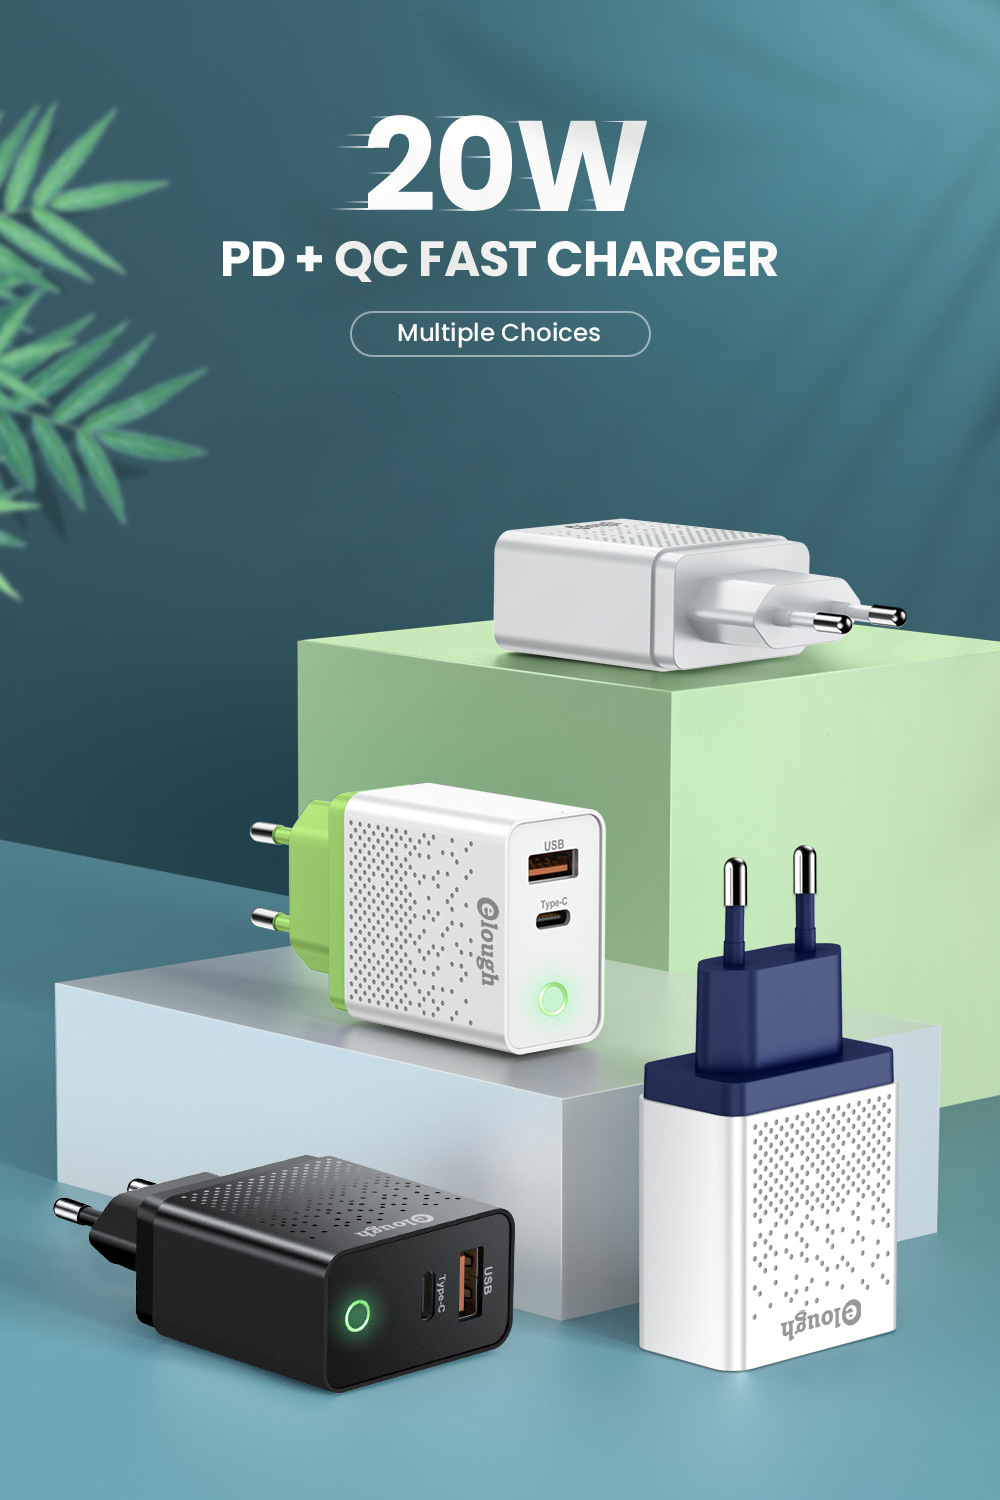 Elough-20W-2-Port-USB-PD-Charger-Dual-20W-USB-C-PD30-QC30-FCP-SCP-Fast-Charging-Wall-Charger-Adapter-1845446-1